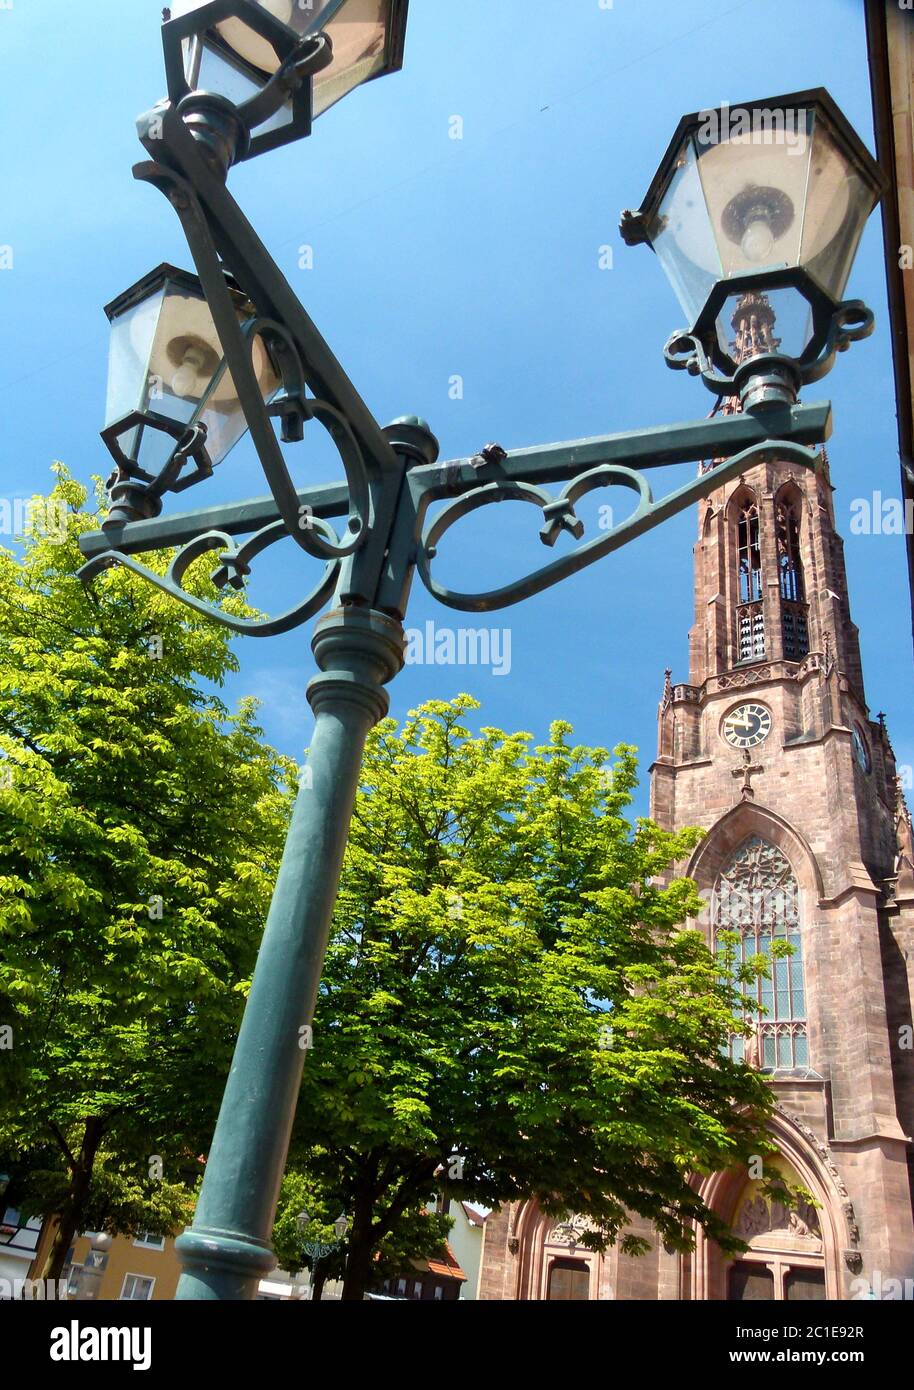 Neogothic church tower with antique street lamp in the foreground 2 Stock Photo